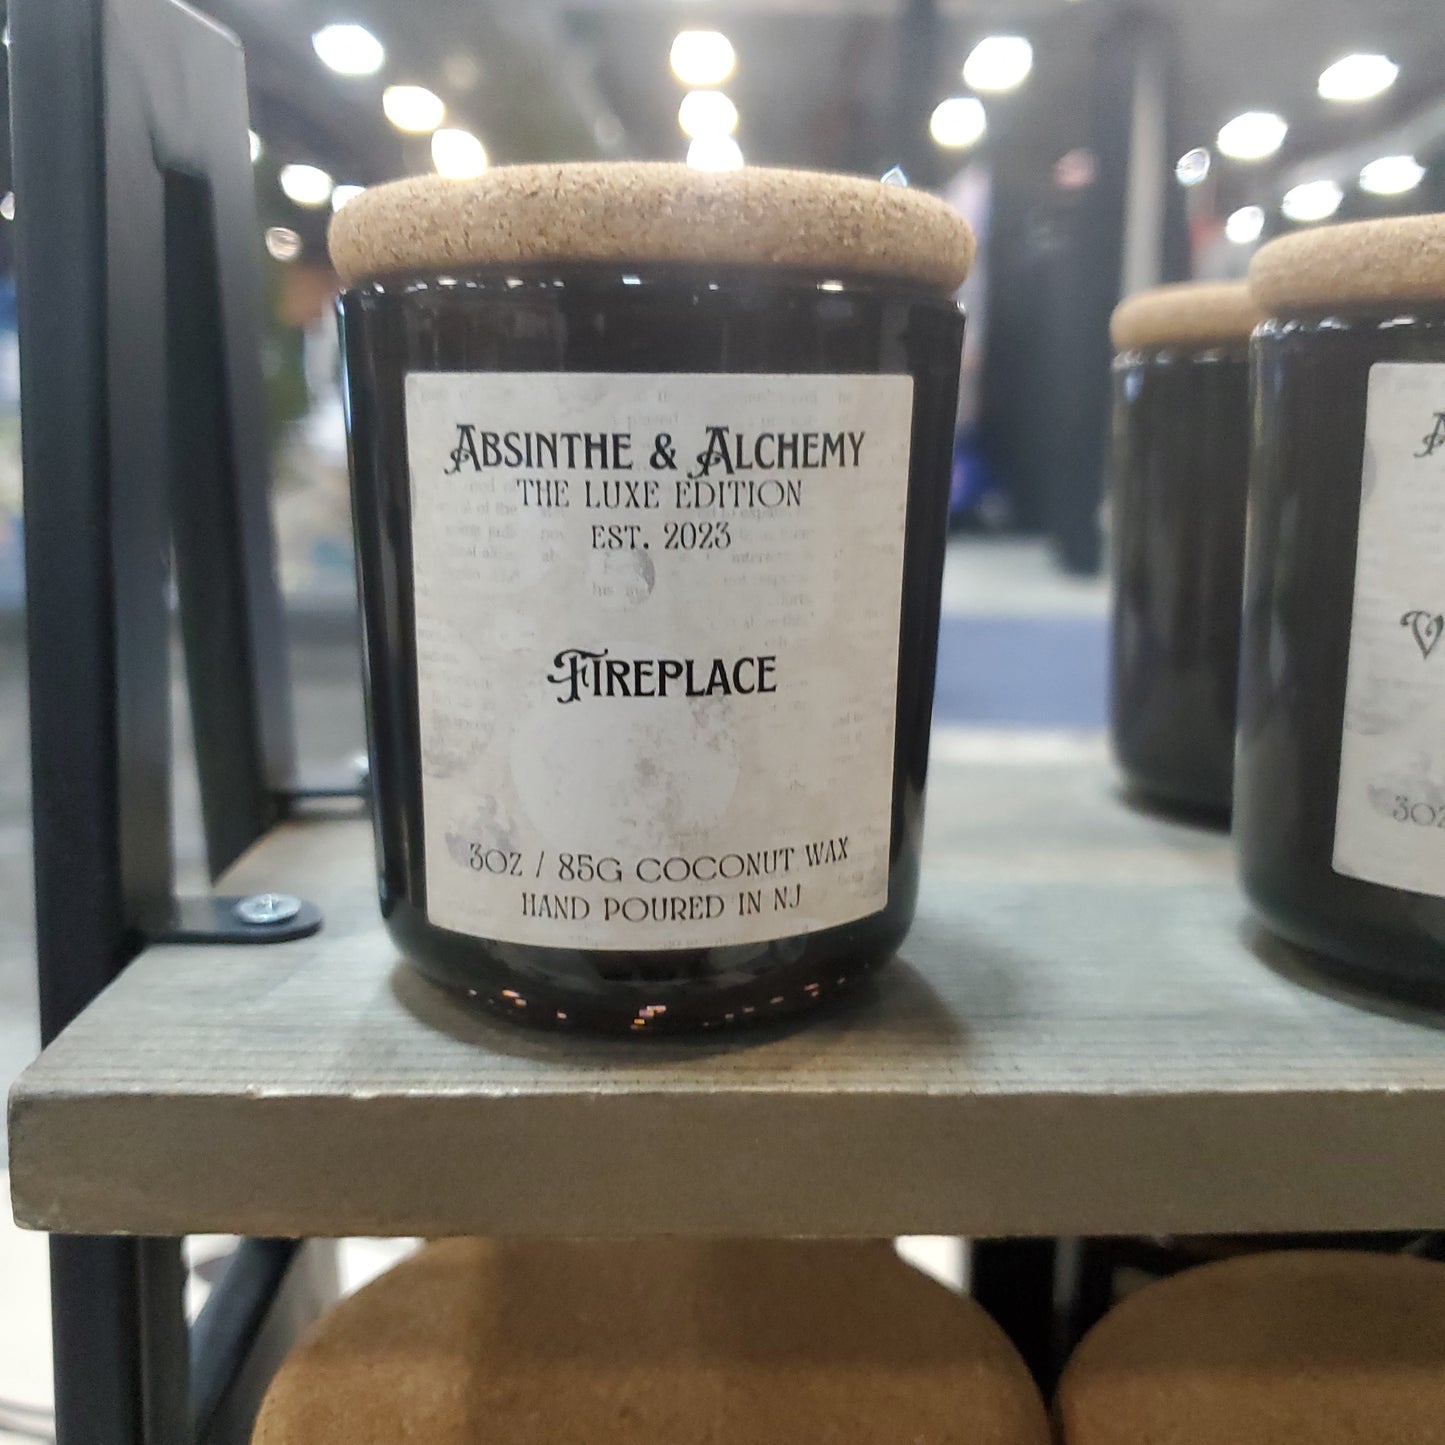 Fireplace 3oz LUXE